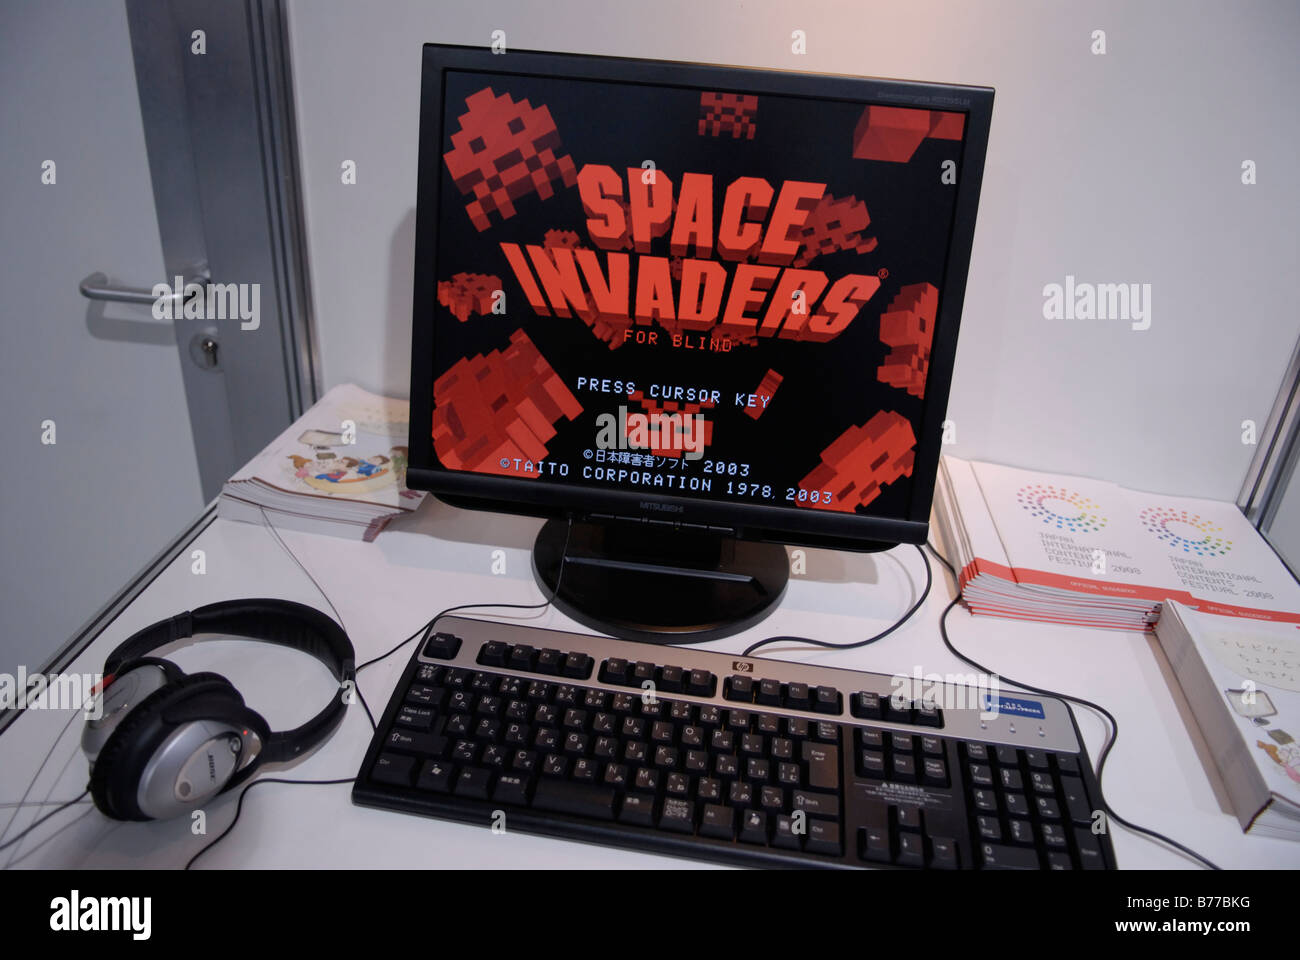 This space invader game as has been adapted so that it can be played by people who are blind. At the Tokyo Game Show 2008. Stock Photo